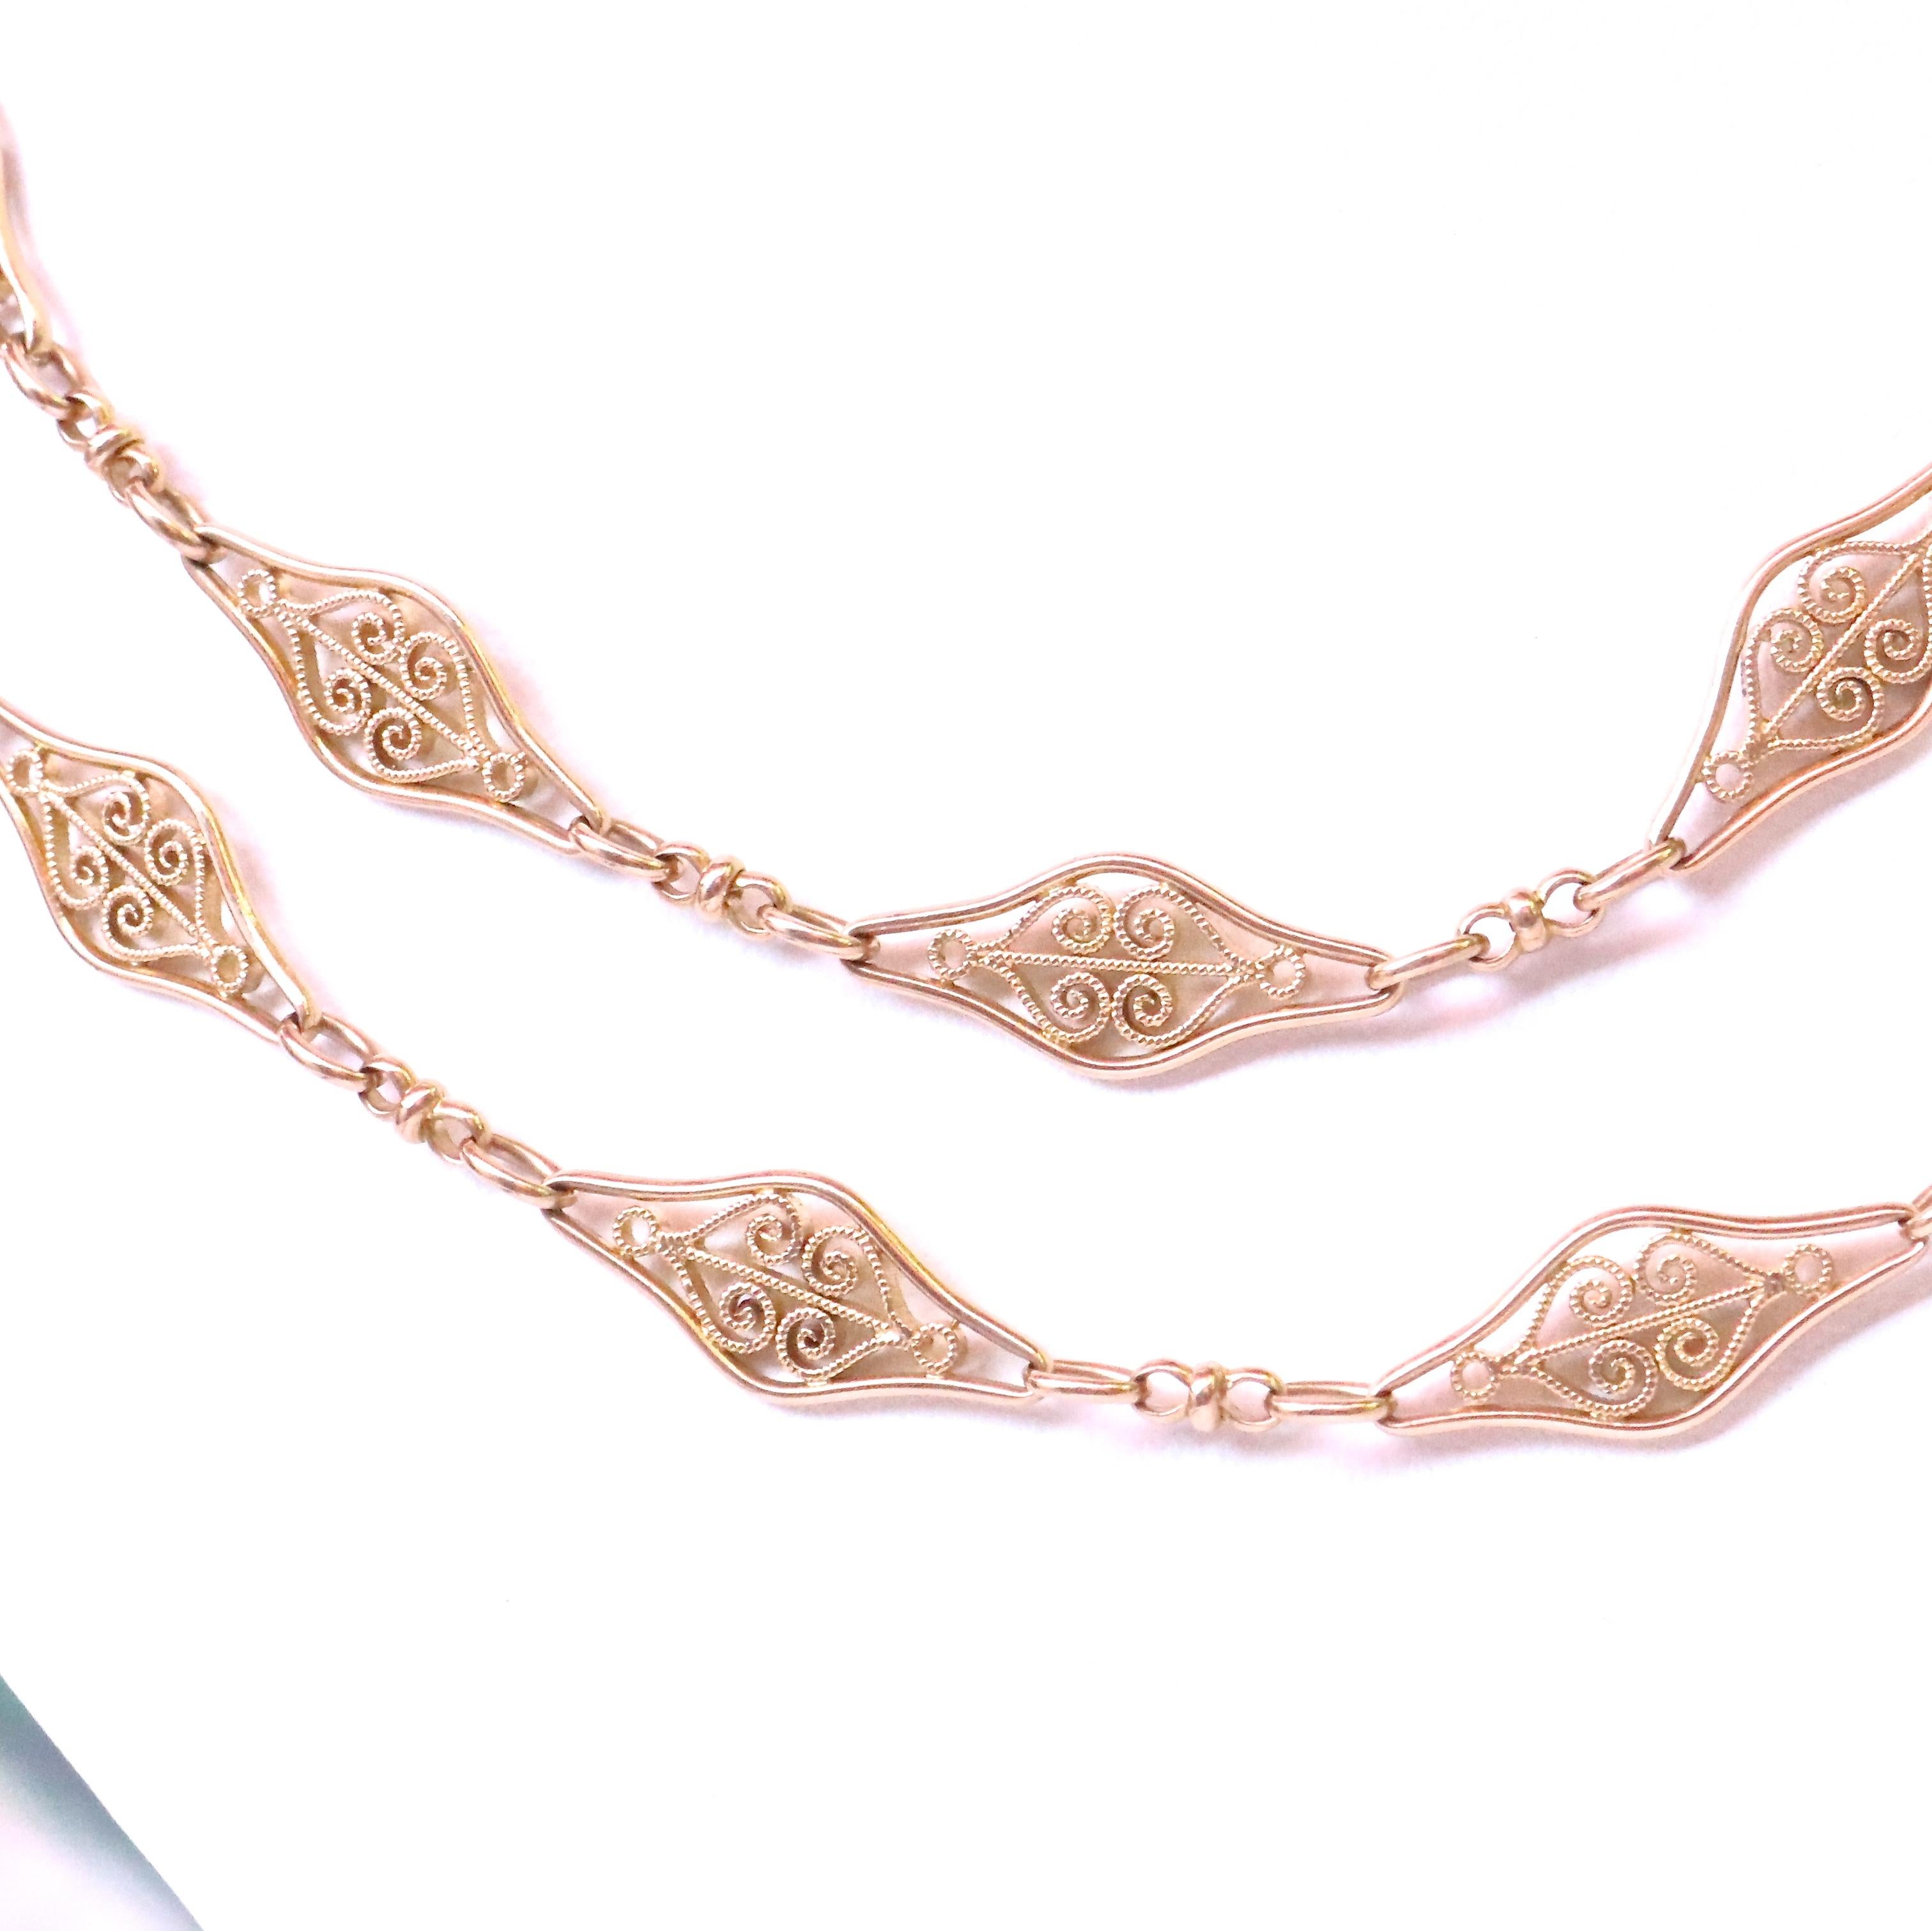 Found on an extensive trip through Southern France, this Antique French 18k gold necklace is a one of a kind find. At 30 inches long, it can be worn long or doubled for a luxurious layered look. Featuring elegantly decorative stations broken up by